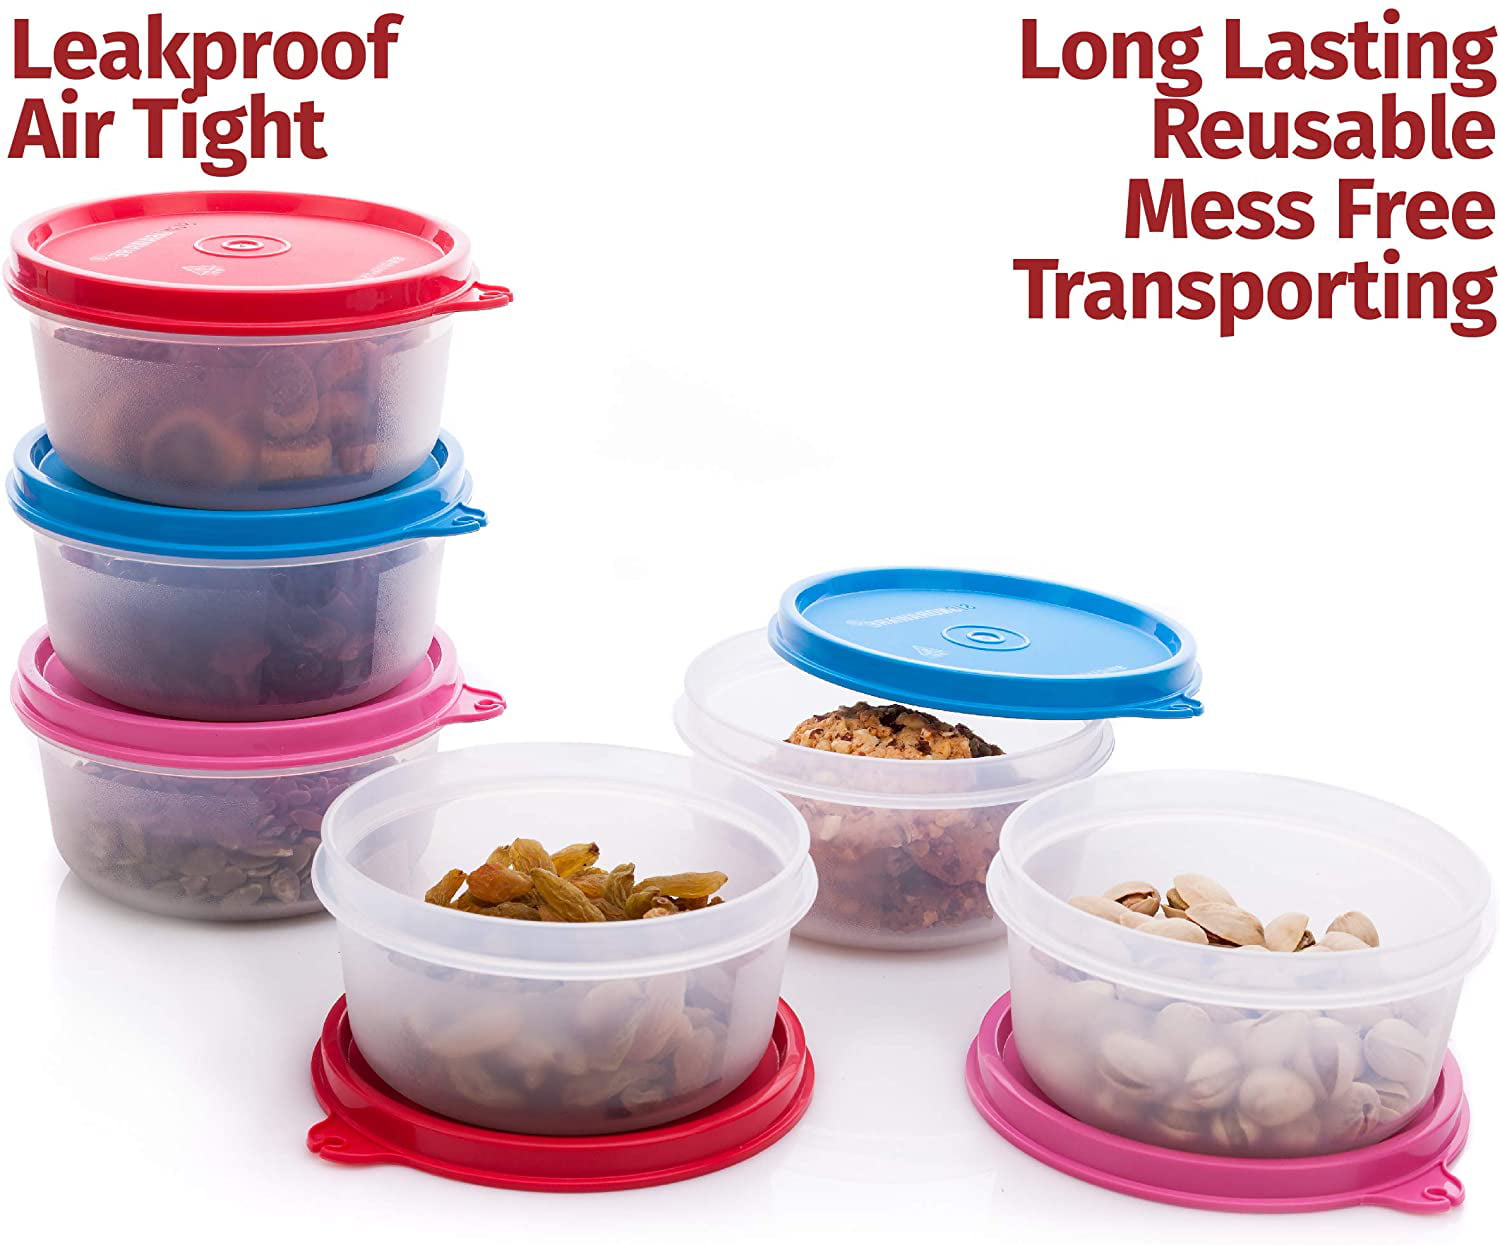 Signora Ware Reusable Airtight Food Prep Storage Containers with Lids, Set  of 6 1.3-oz